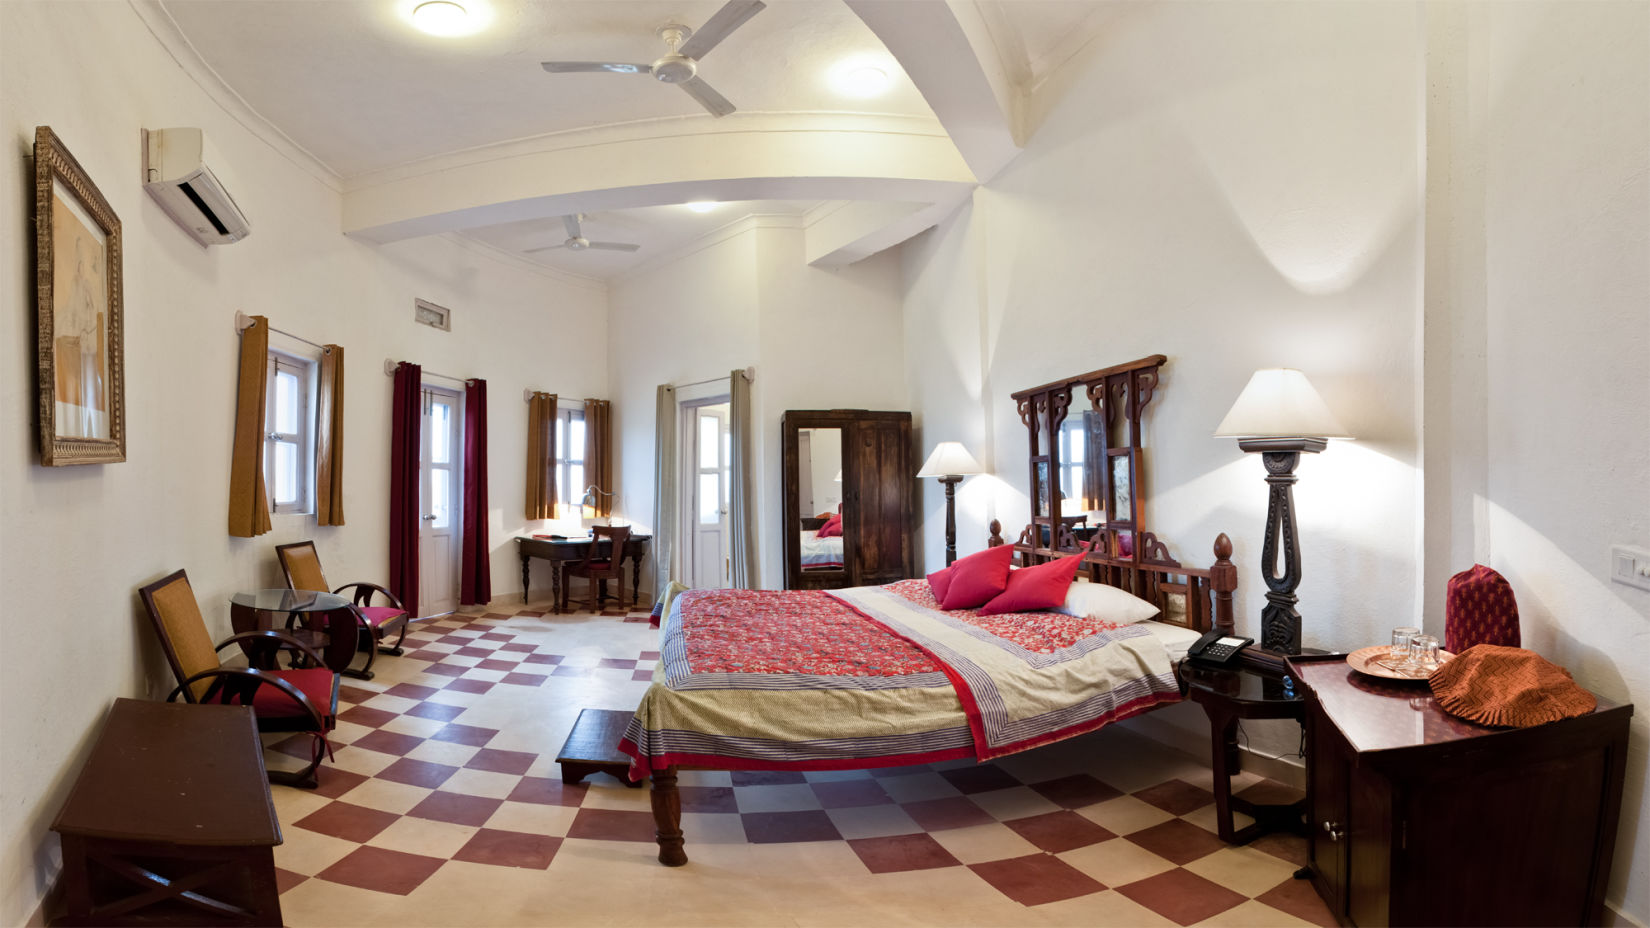 Hill Fort Kesroli 14th Century Alwar - interior view of the Narendra Burj with a king size bed and checkered floors